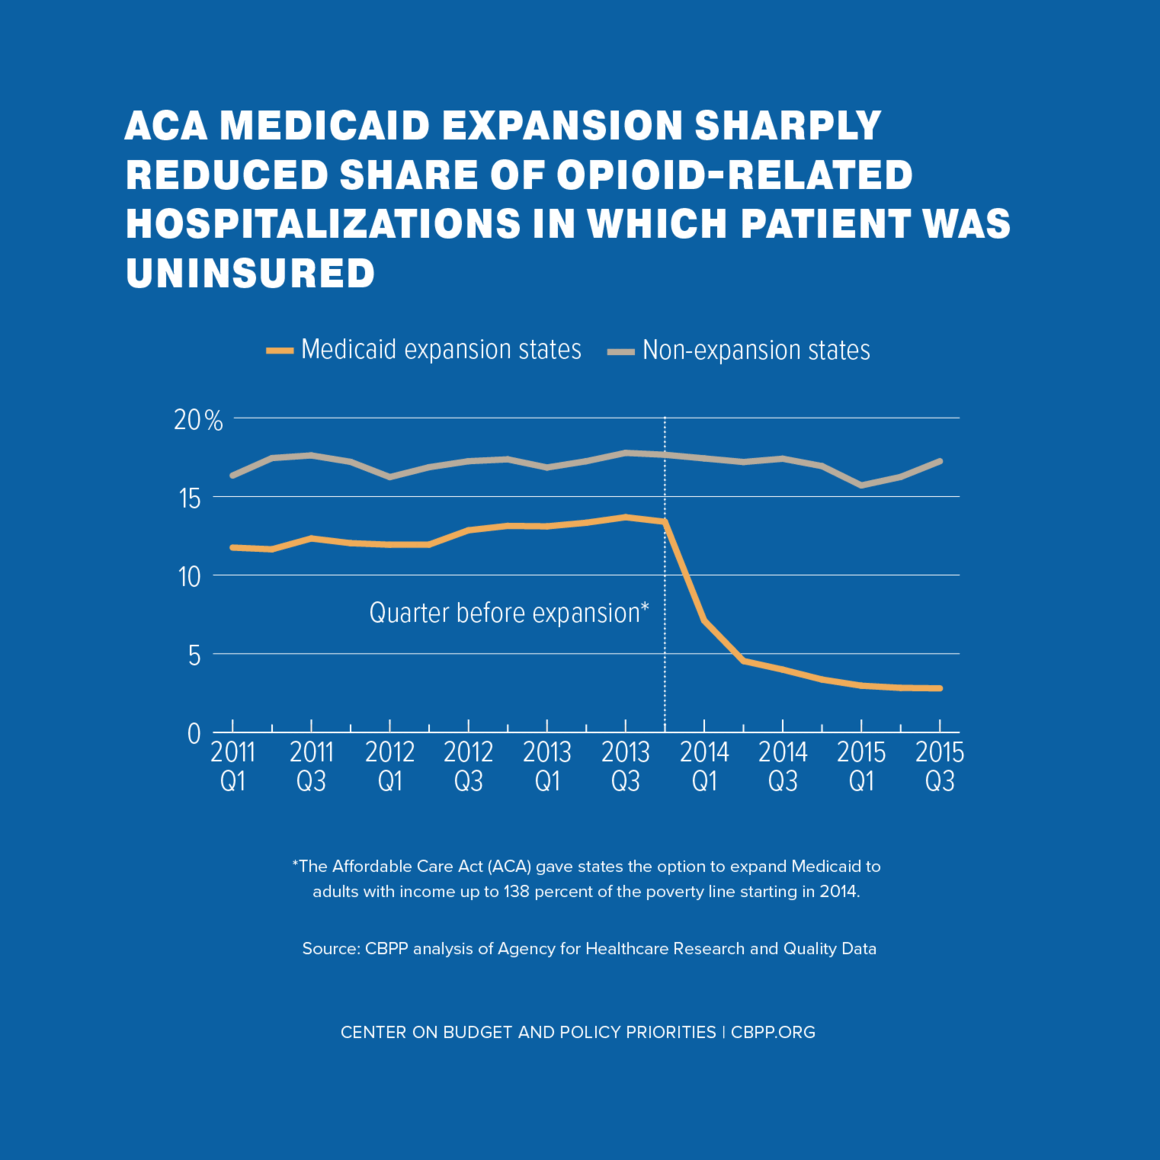 ACA Medicaid Expansion Sharply Reduced Share of Opioid-Related Hospitalizations in Which Patient Was Uninsured